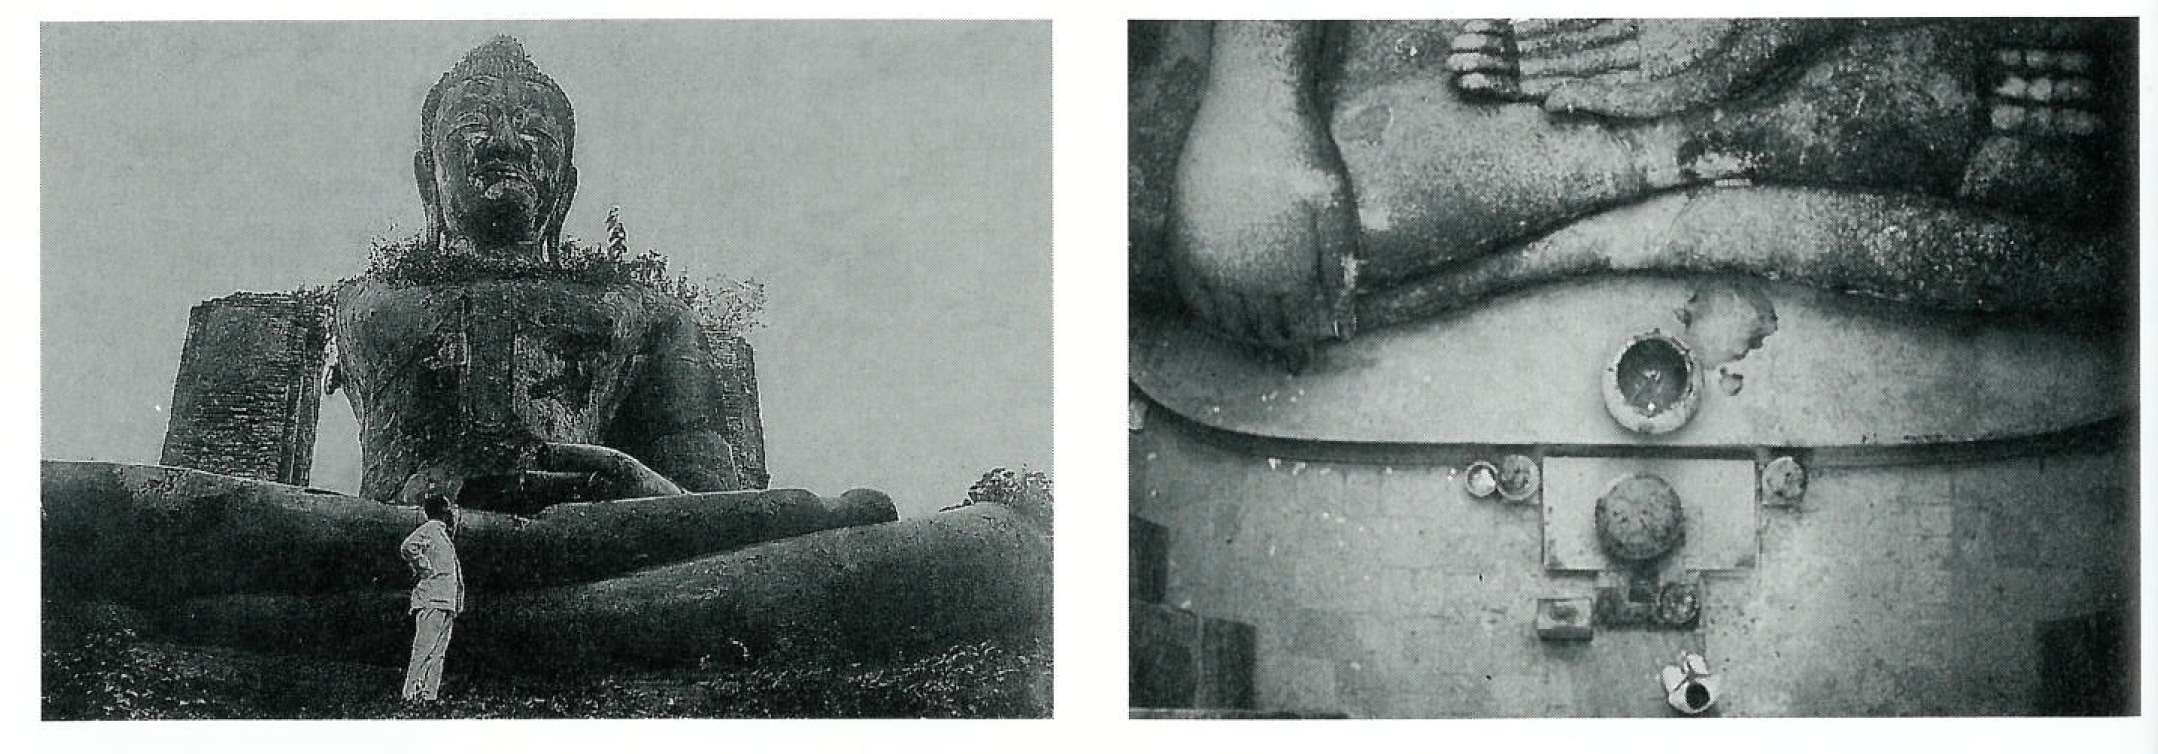 (left) Large Buddha (Little Man), photographer, date, and location unknown. (right) Man Kneeling in Front of Large Seated Buddha, Nancy Shanahan, photographer, 1986. Sukhothai, Thailand.